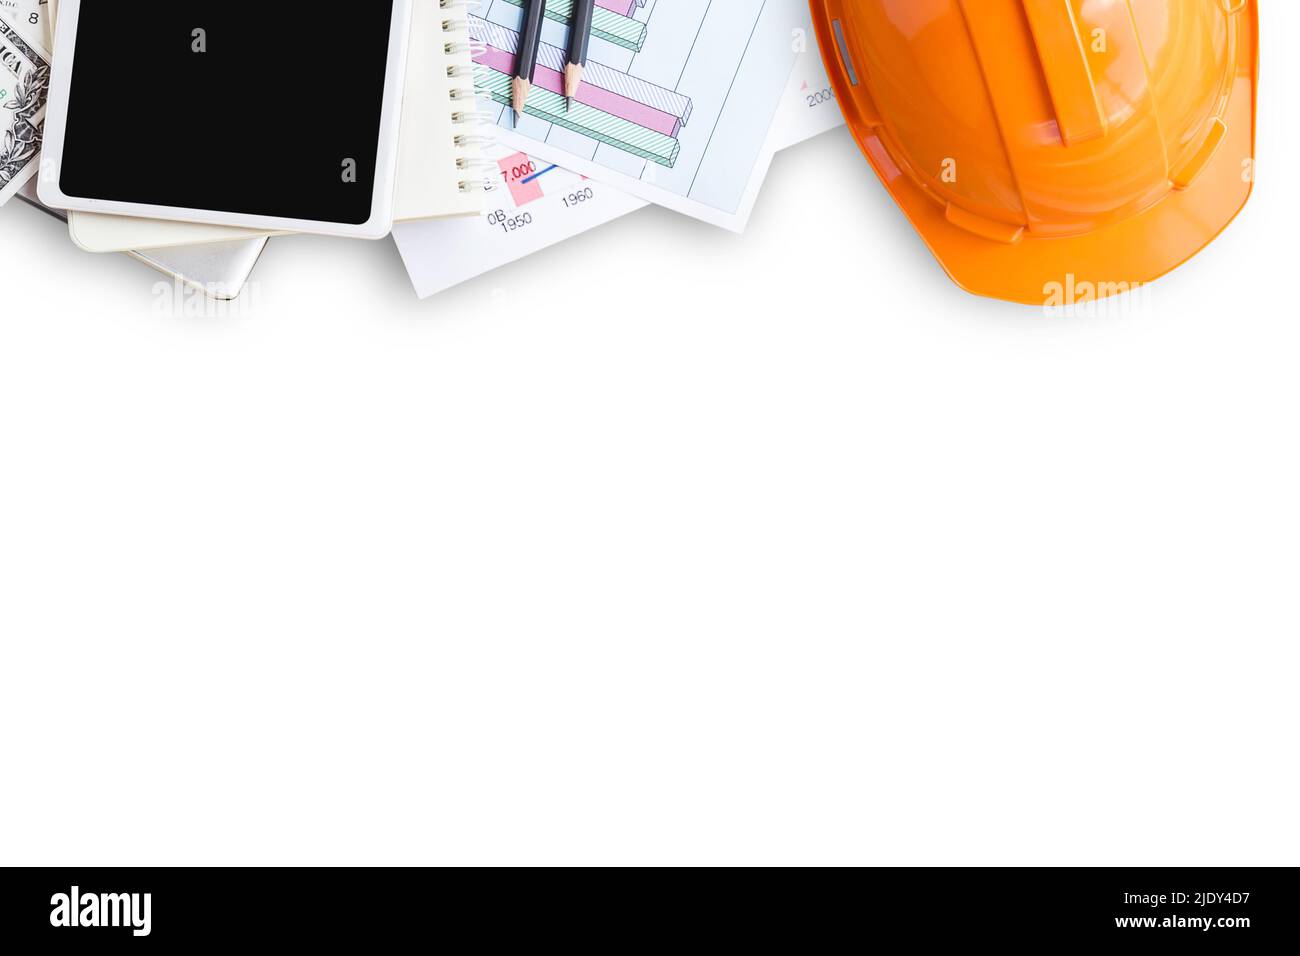 Orange safety helmet and laptop computer, notebook,pencil and smartphone on white backgroud. Top view with copy space. Business concept Stock Photo